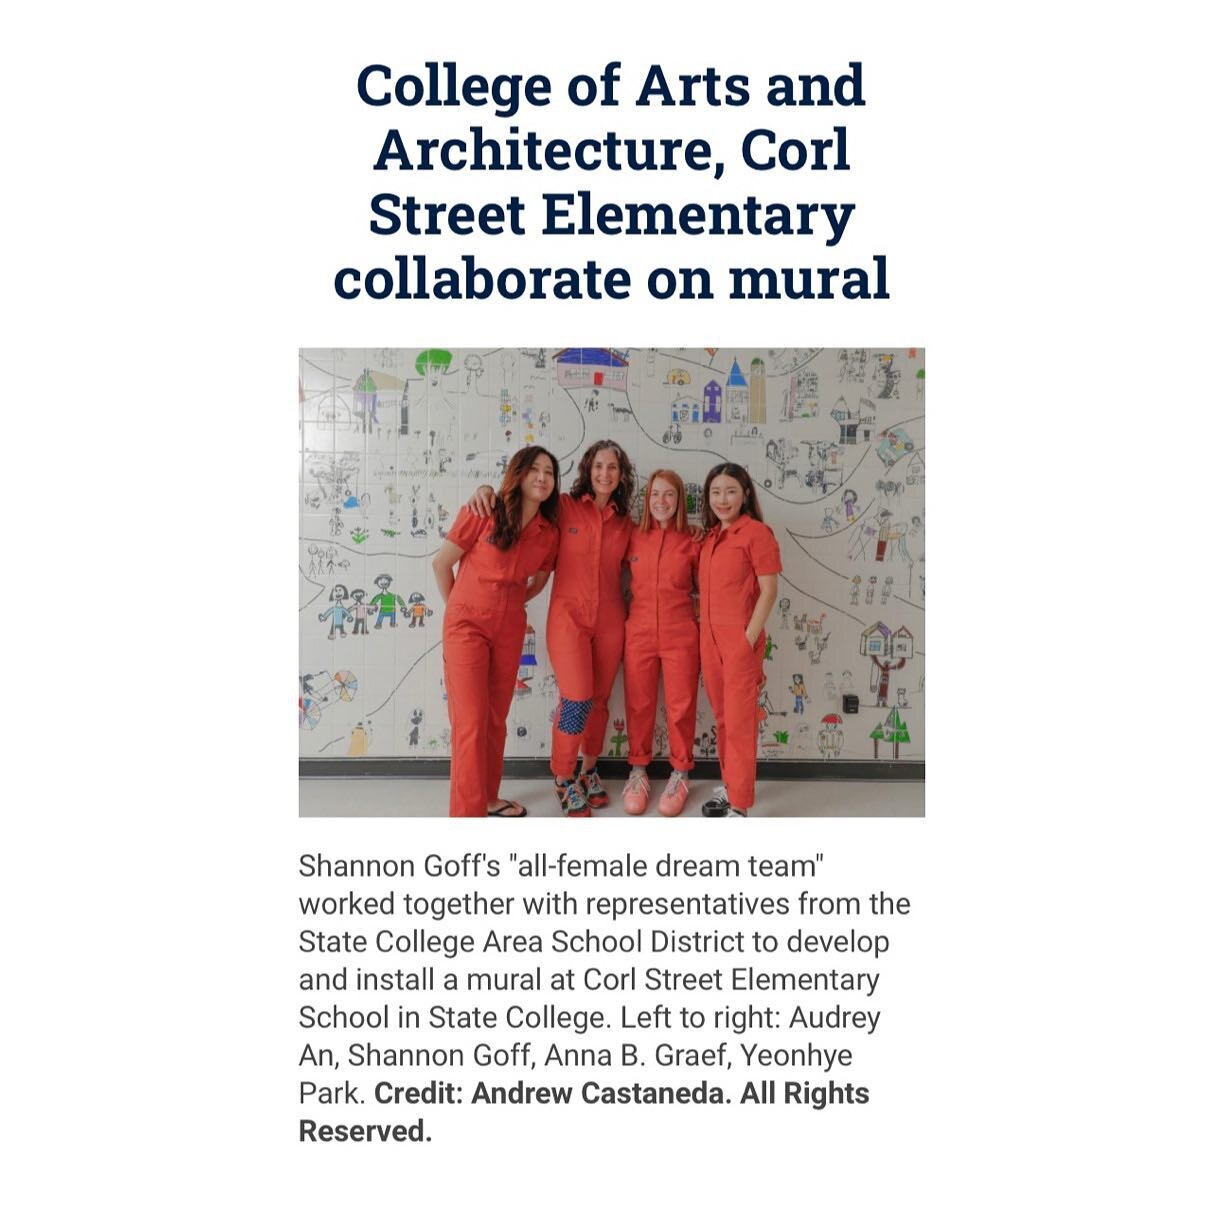 ✨🗞 We Are! On Penn State News! 🗞✨

Children&rsquo;s hopes and dreams for their future, captured in drawings made during the early months of the COVID-19 pandemic, are highlighted in a new mural at Corl Street Elementary School in State College, spe